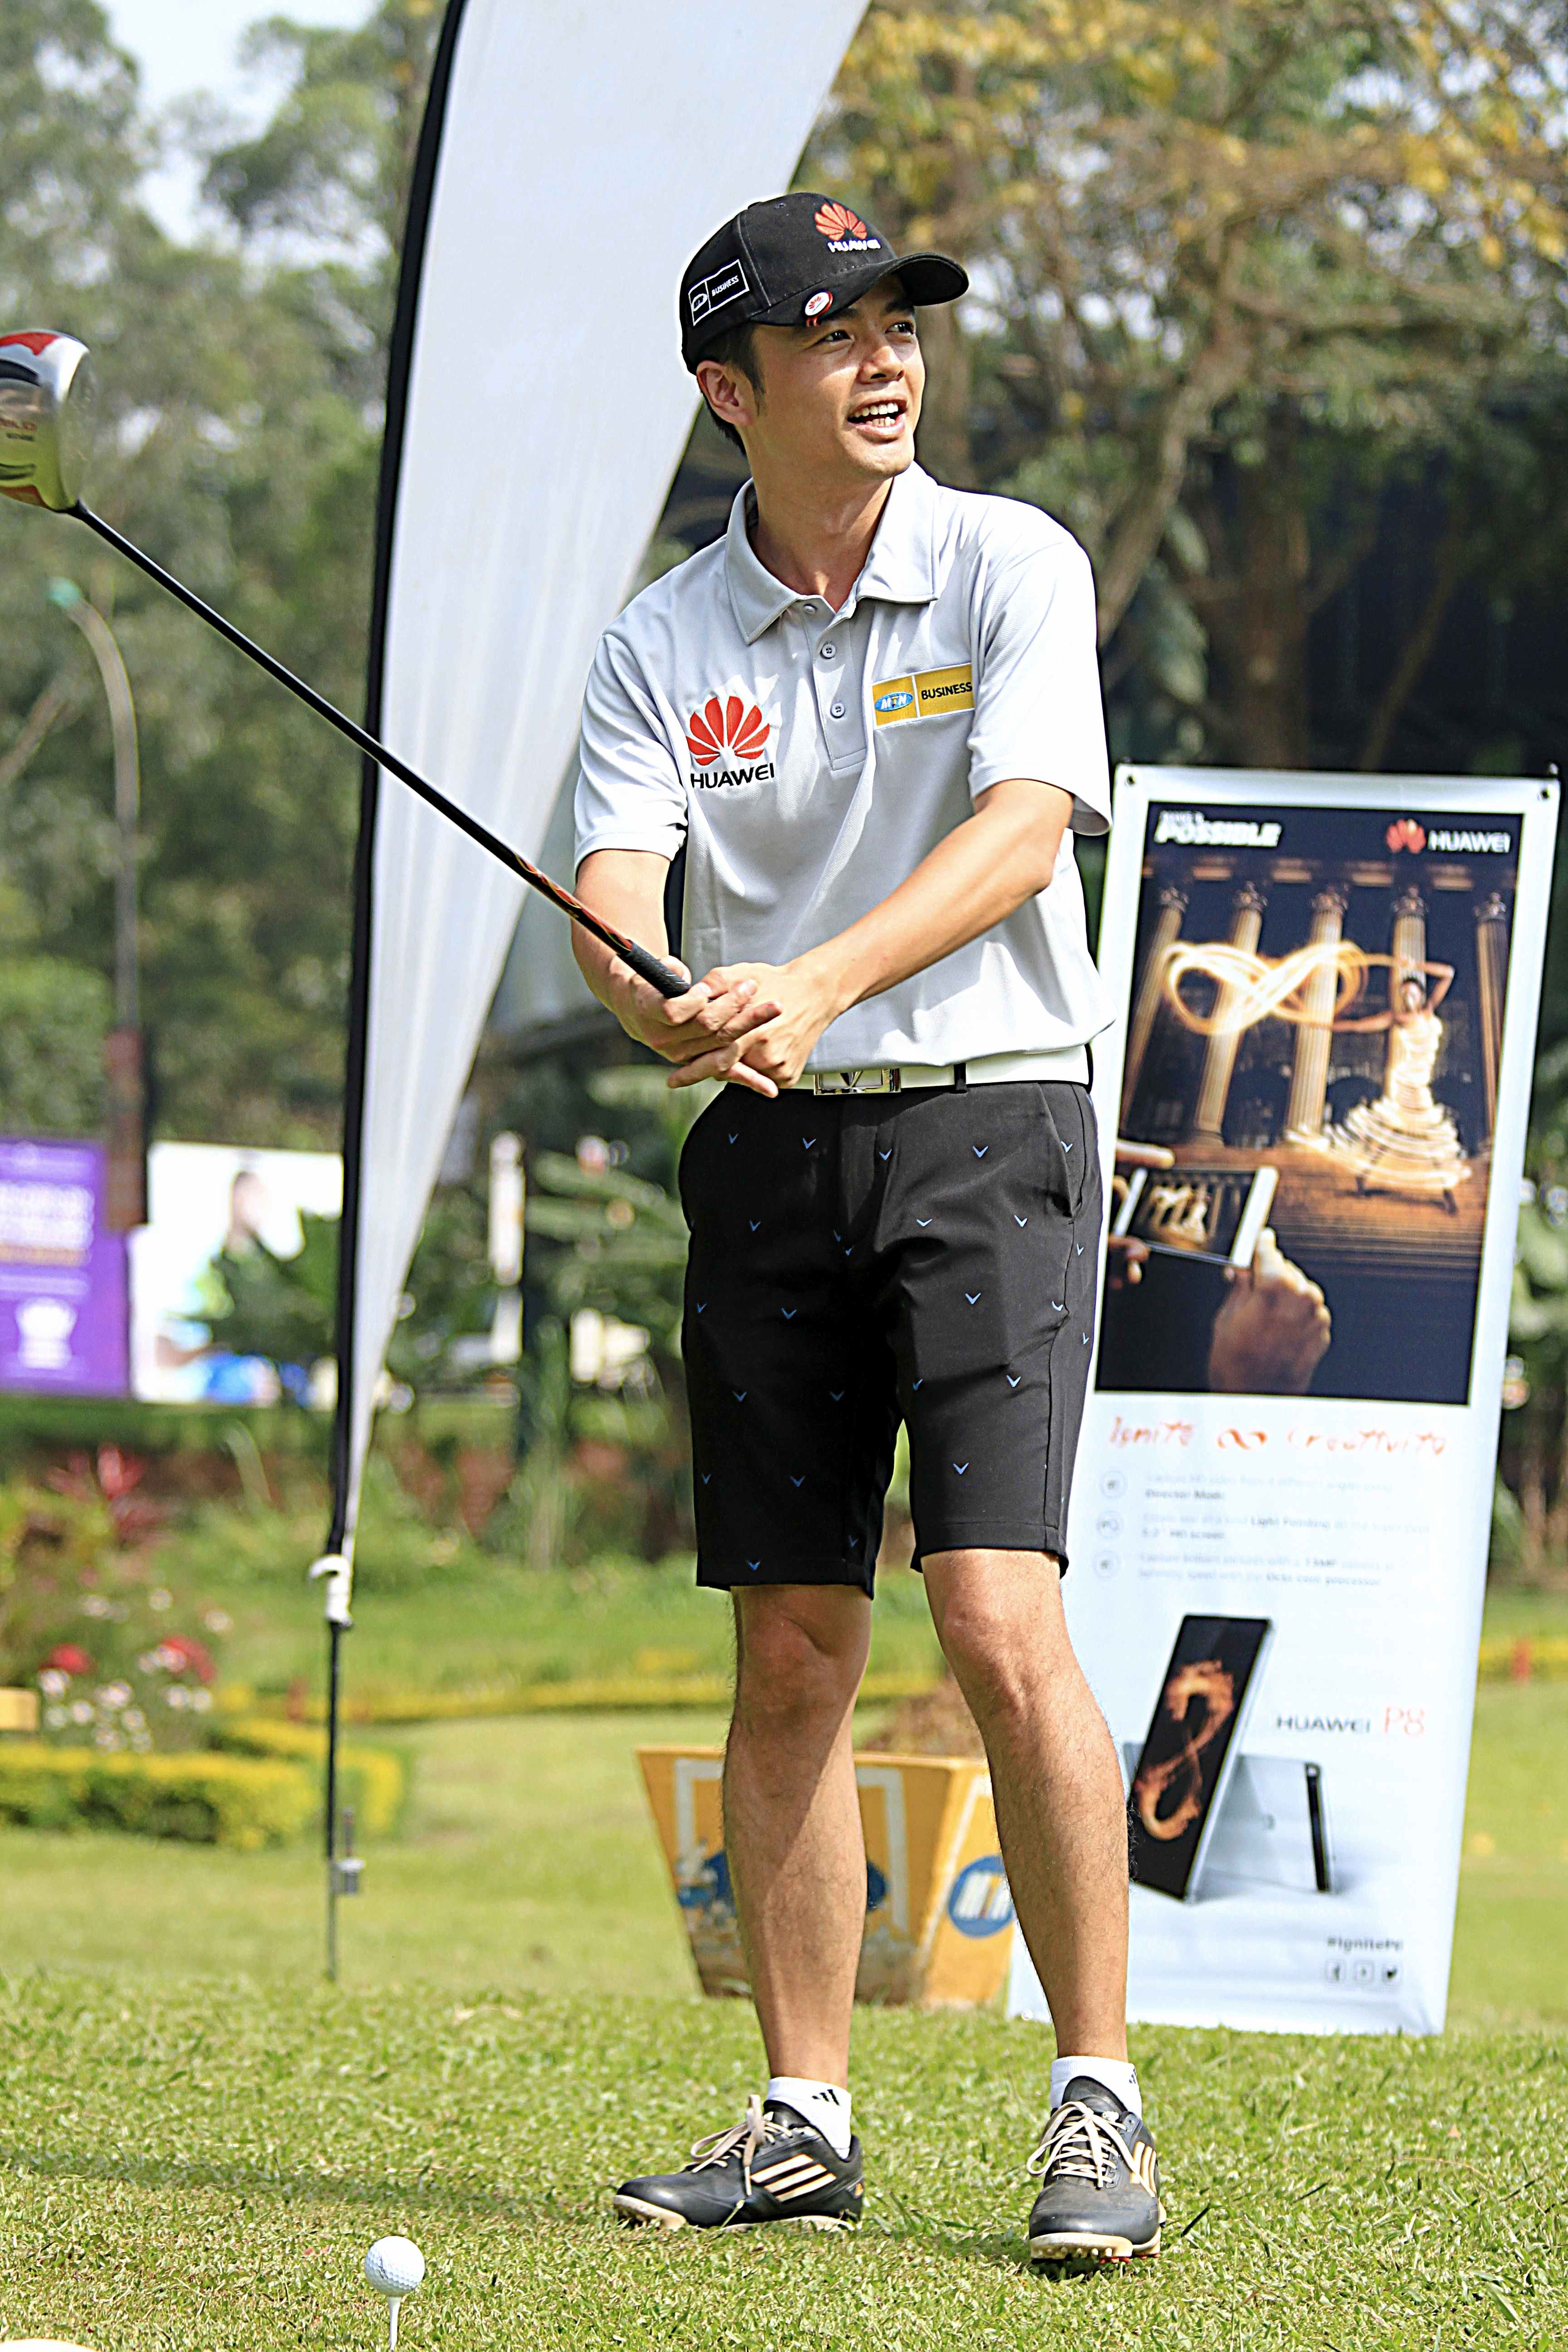 Mr. Stanley Chyn, MD Huawei Teeing off at the course.